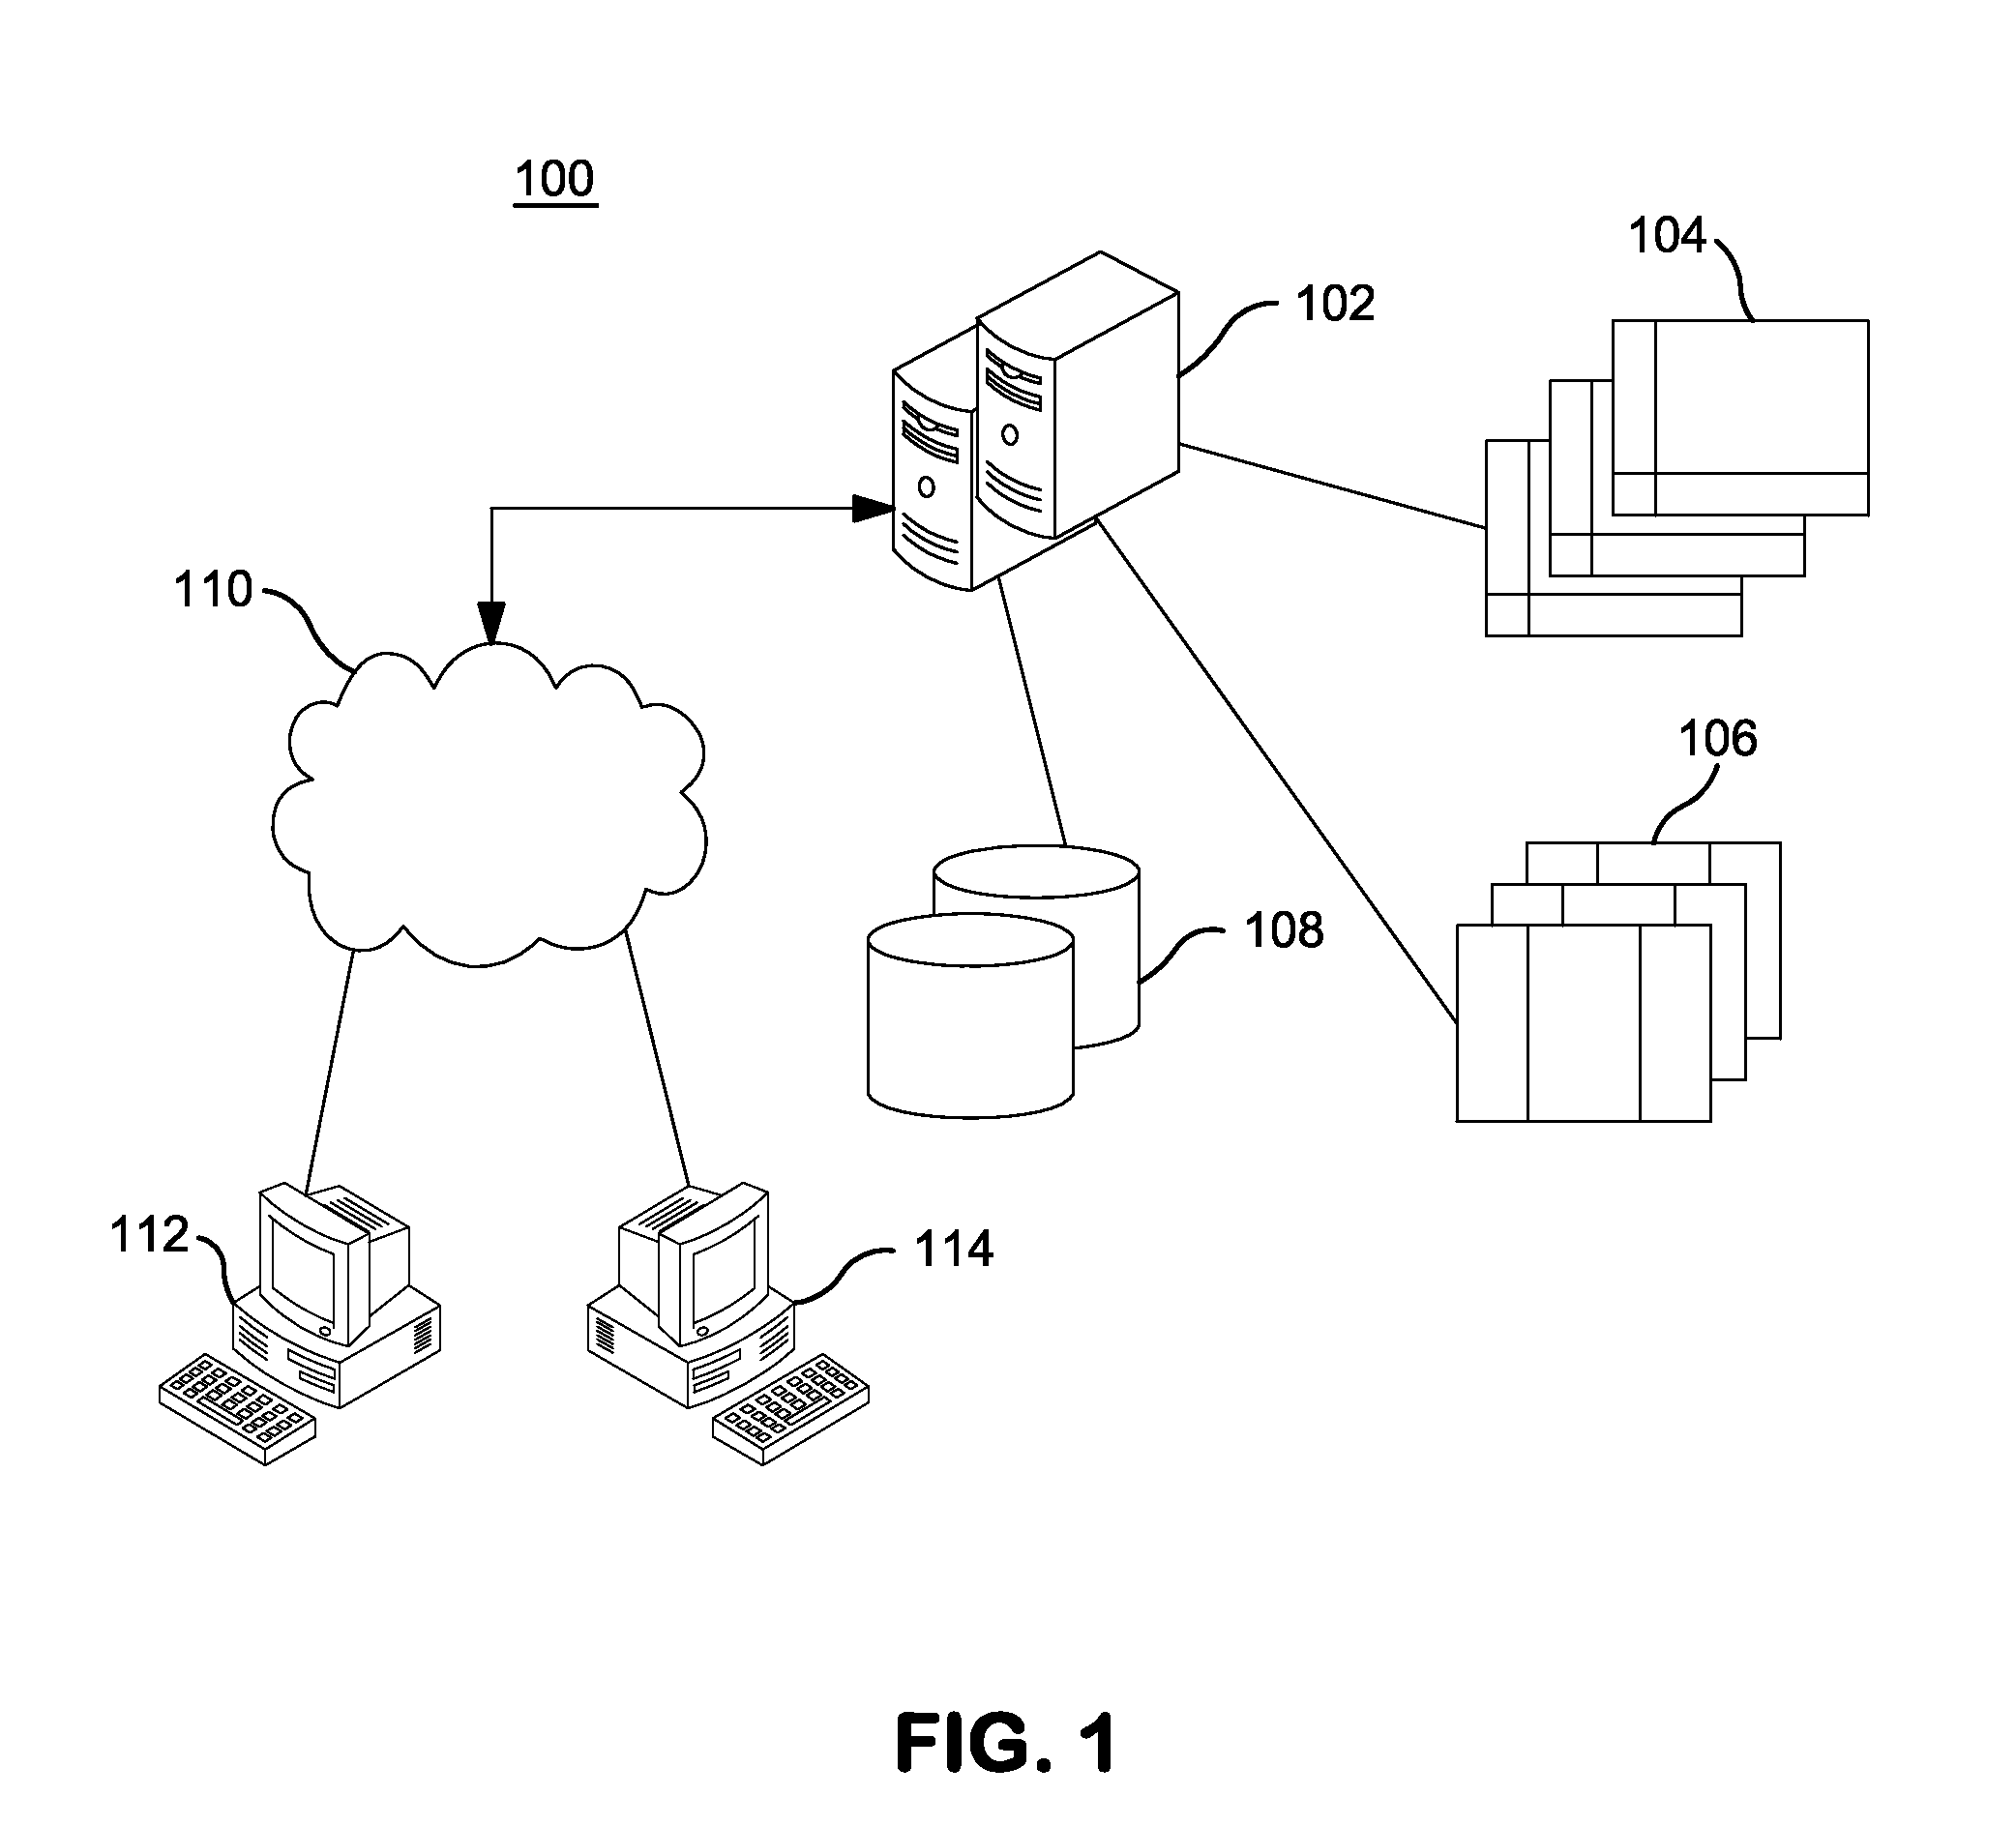 Systems and methods for genomic annotation and distributed variant interpretation